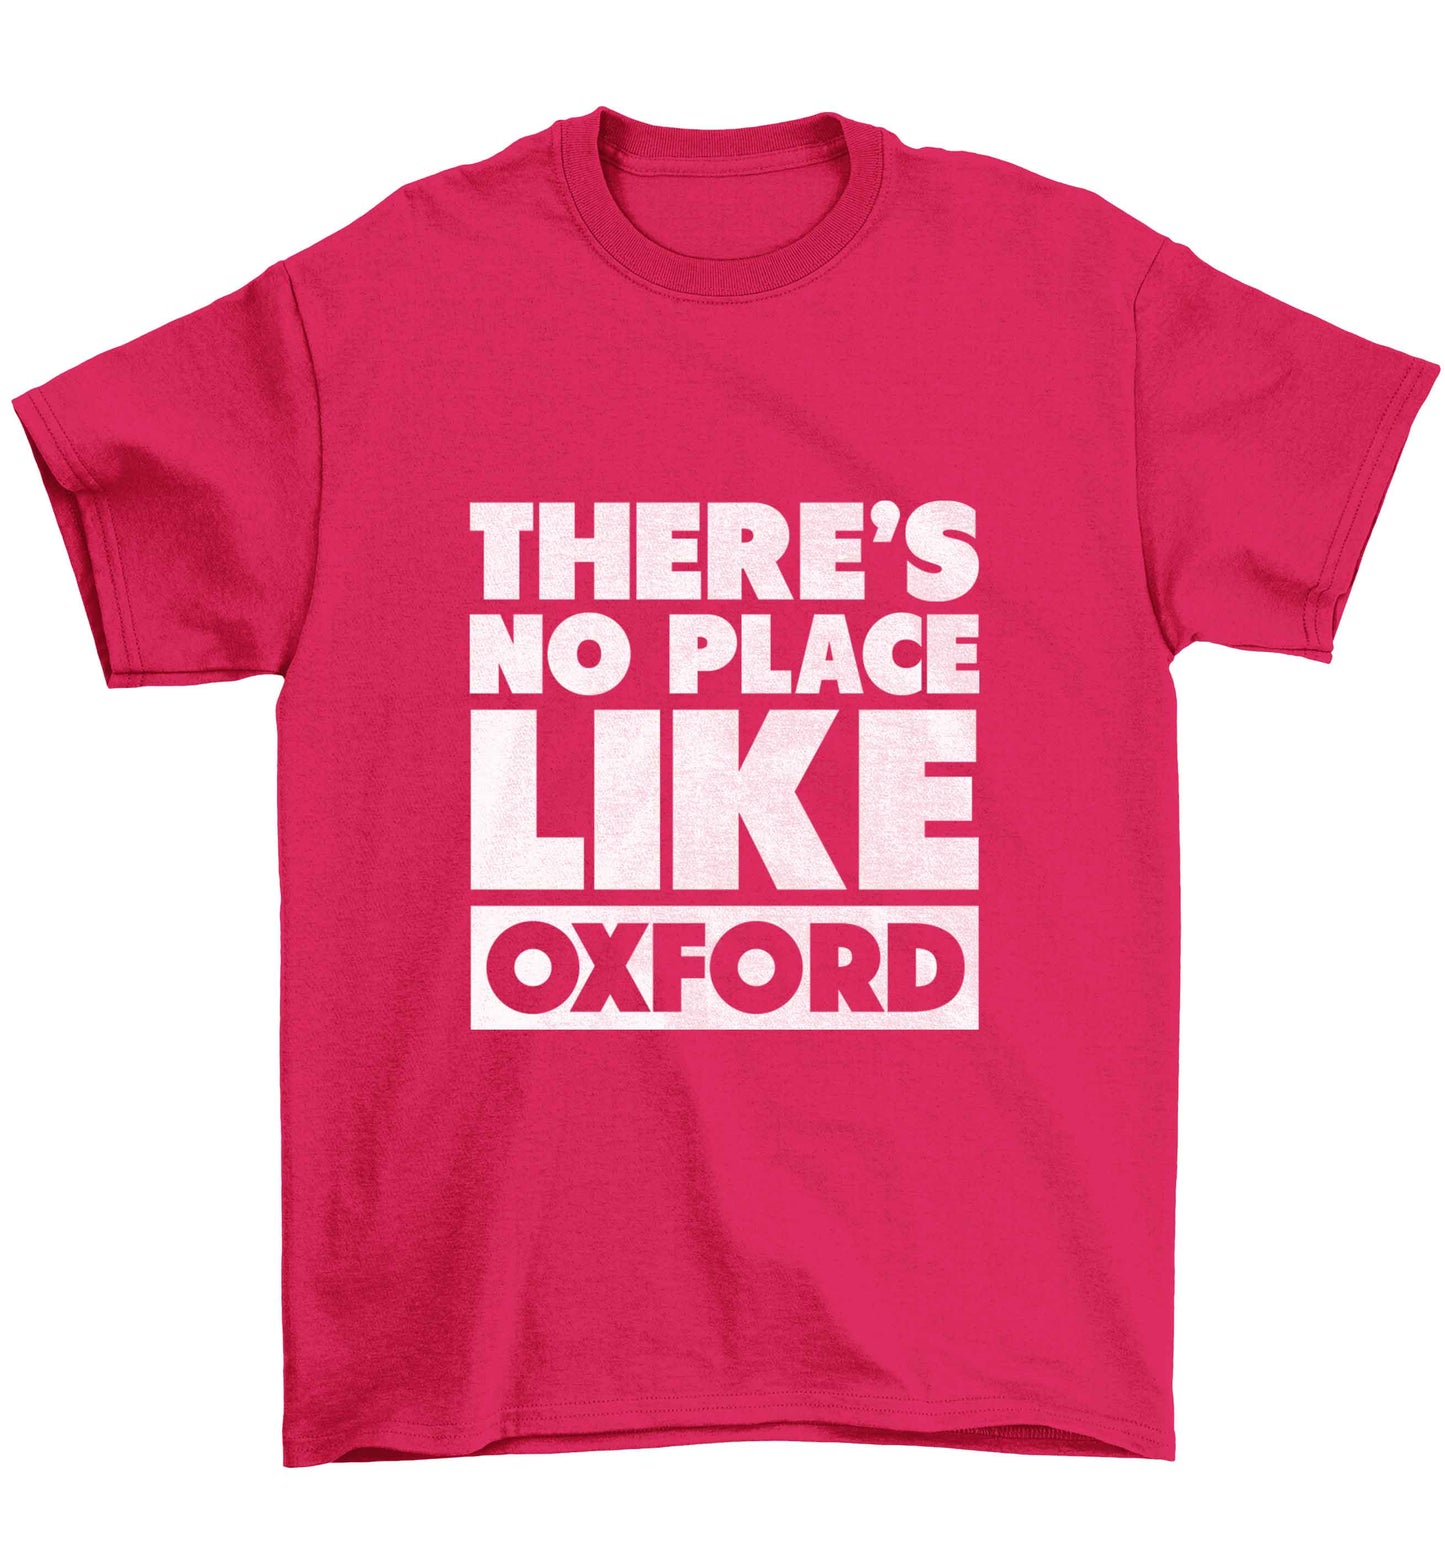 There's no place like Oxford Children's pink Tshirt 12-13 Years